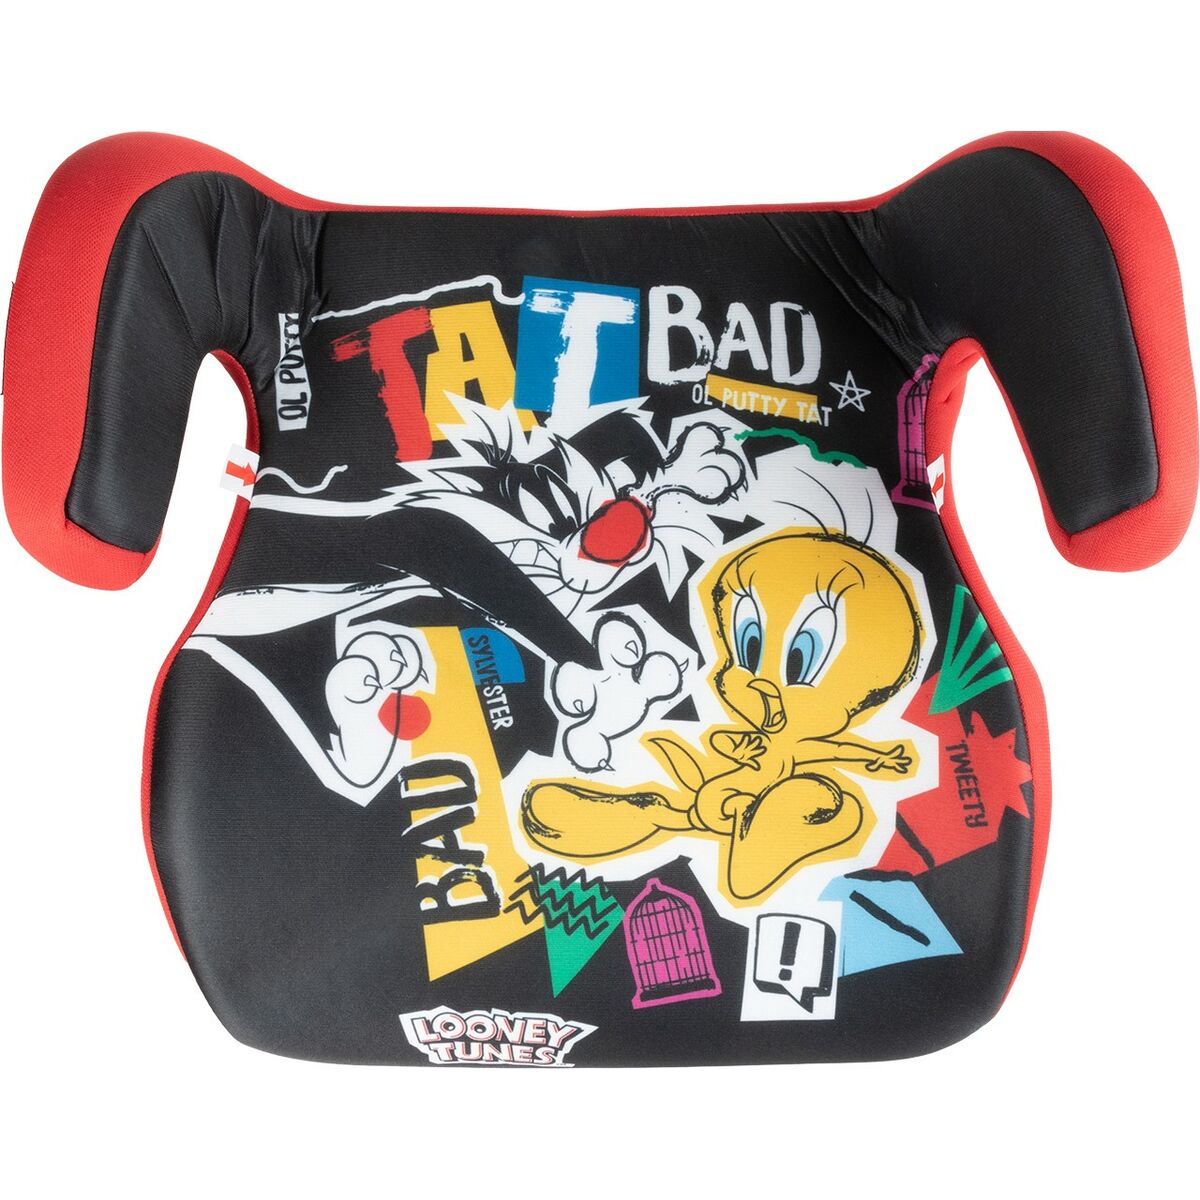 Car Booster Seat Looney Tunes CZ11000 6-12 Years